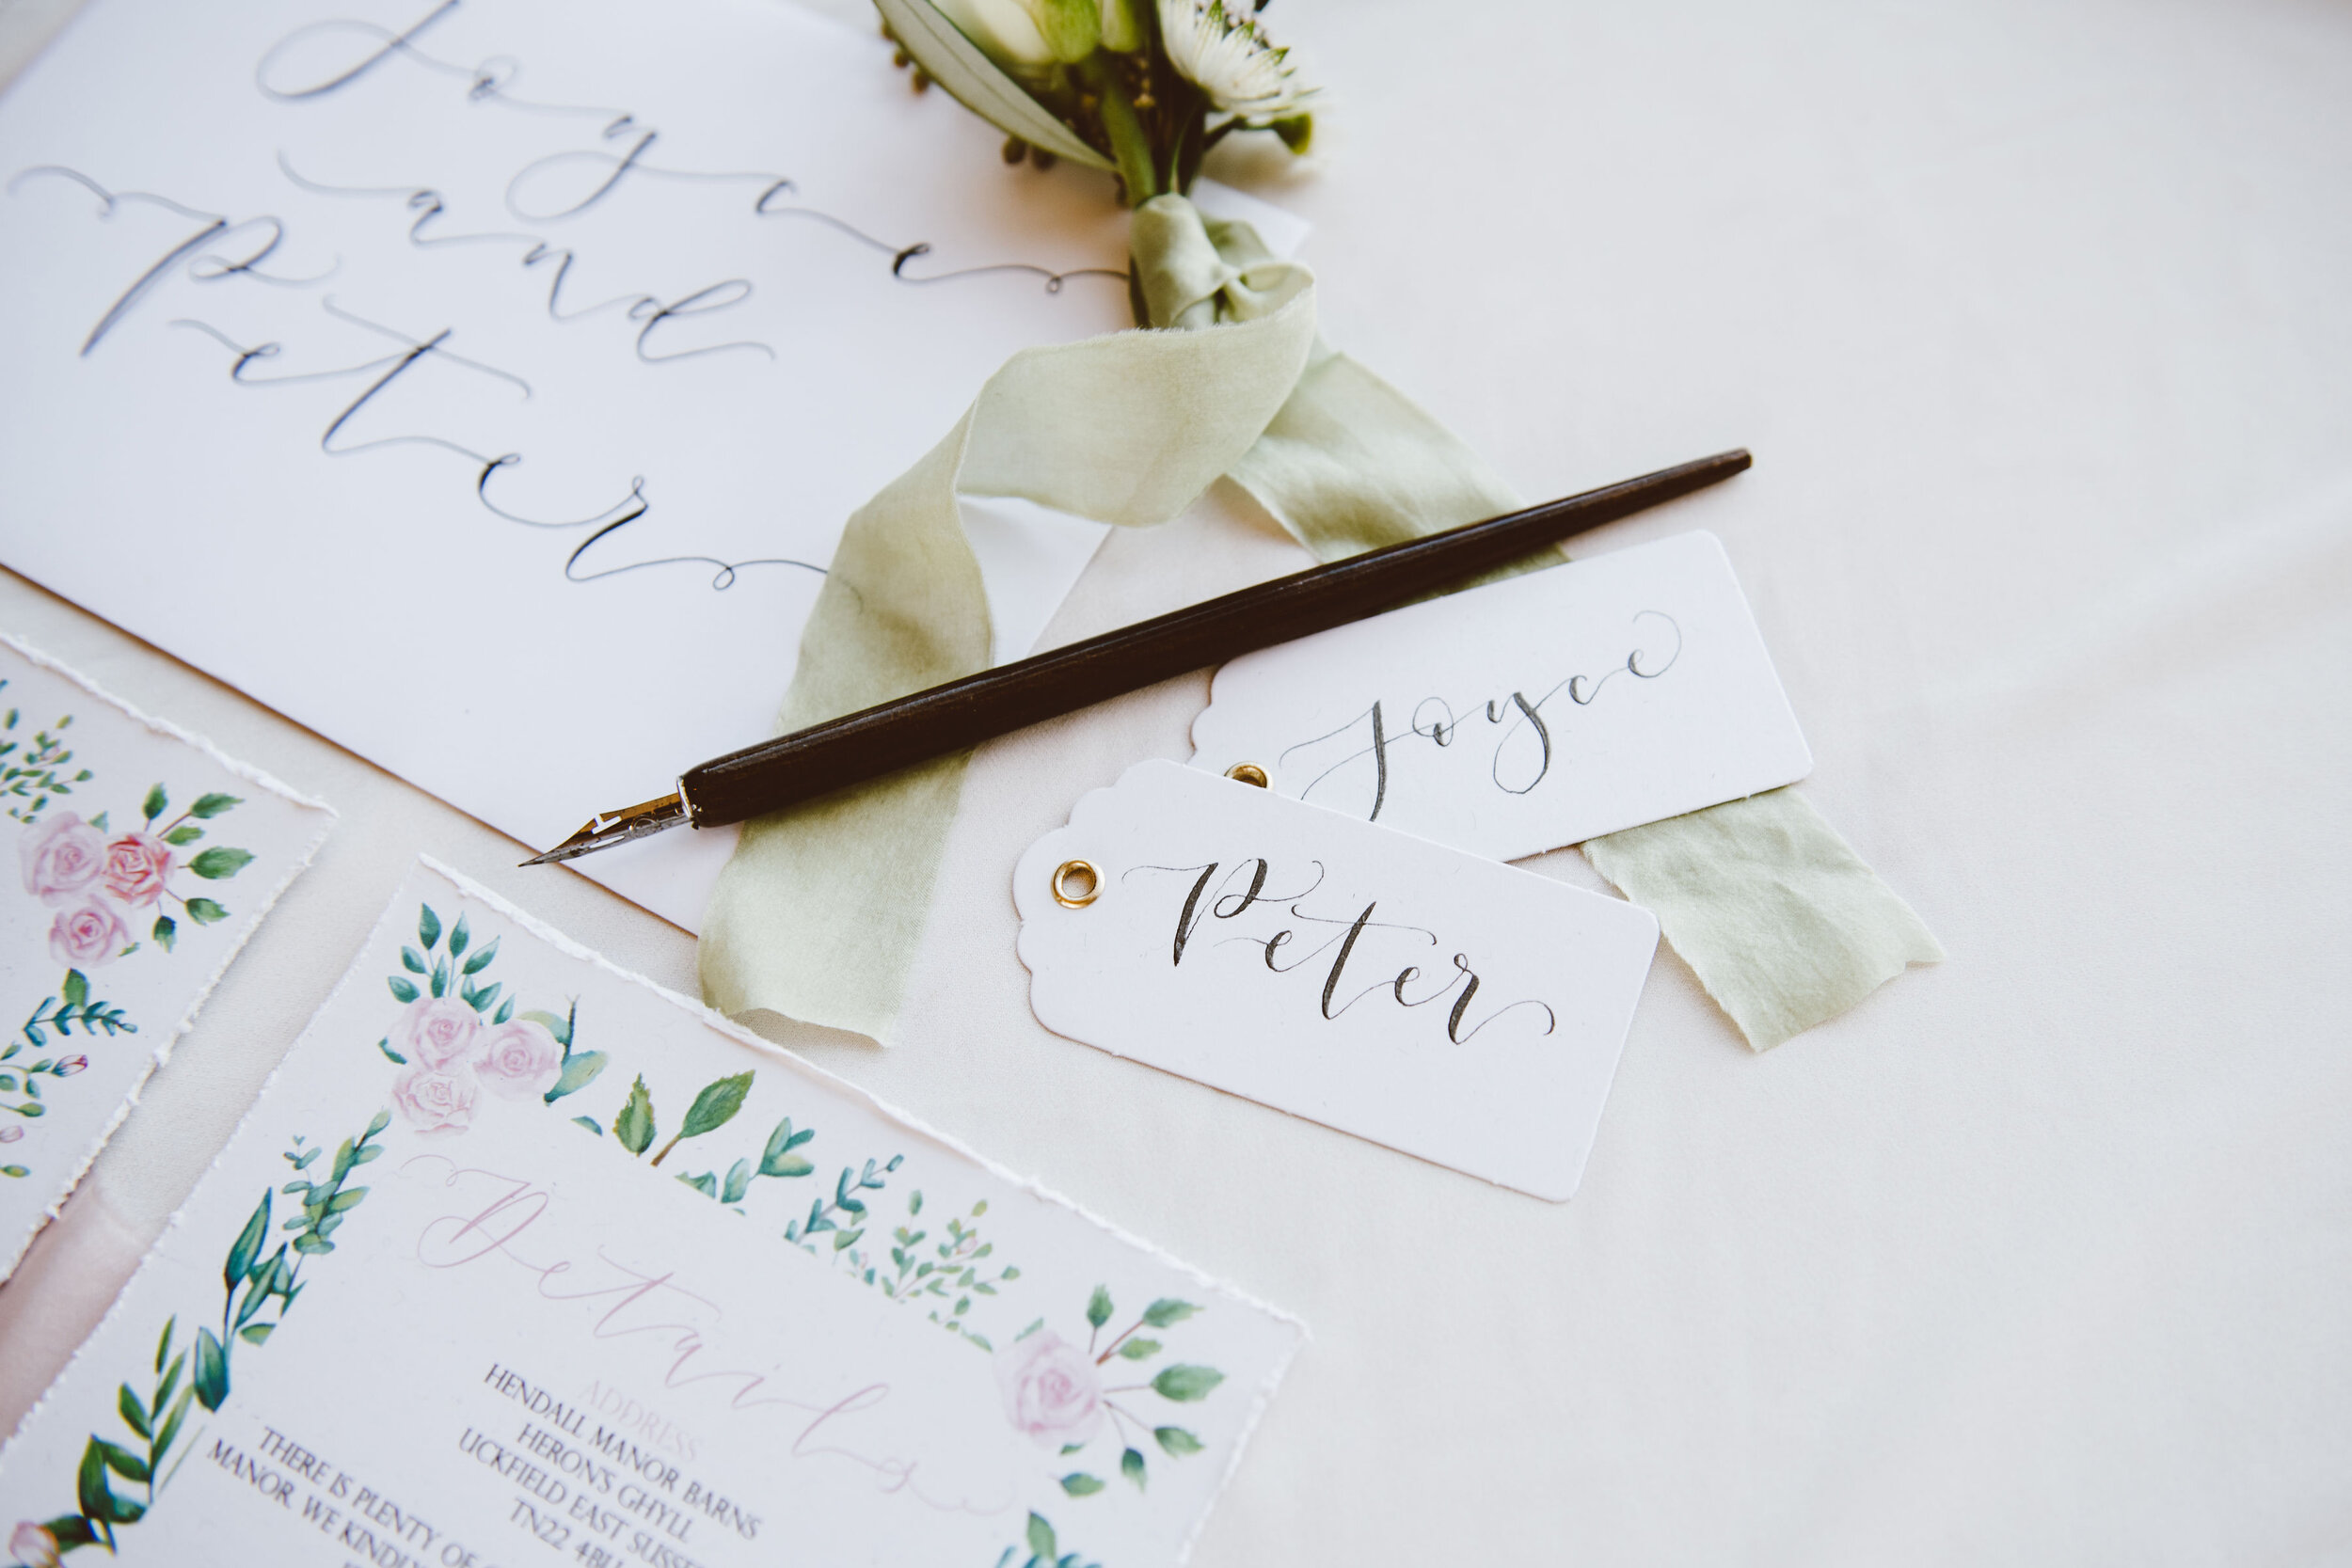 Luxury recycled paper place cards with  hand-lettered calligraphy by The Amyverse - Eco friendly wedding stationery